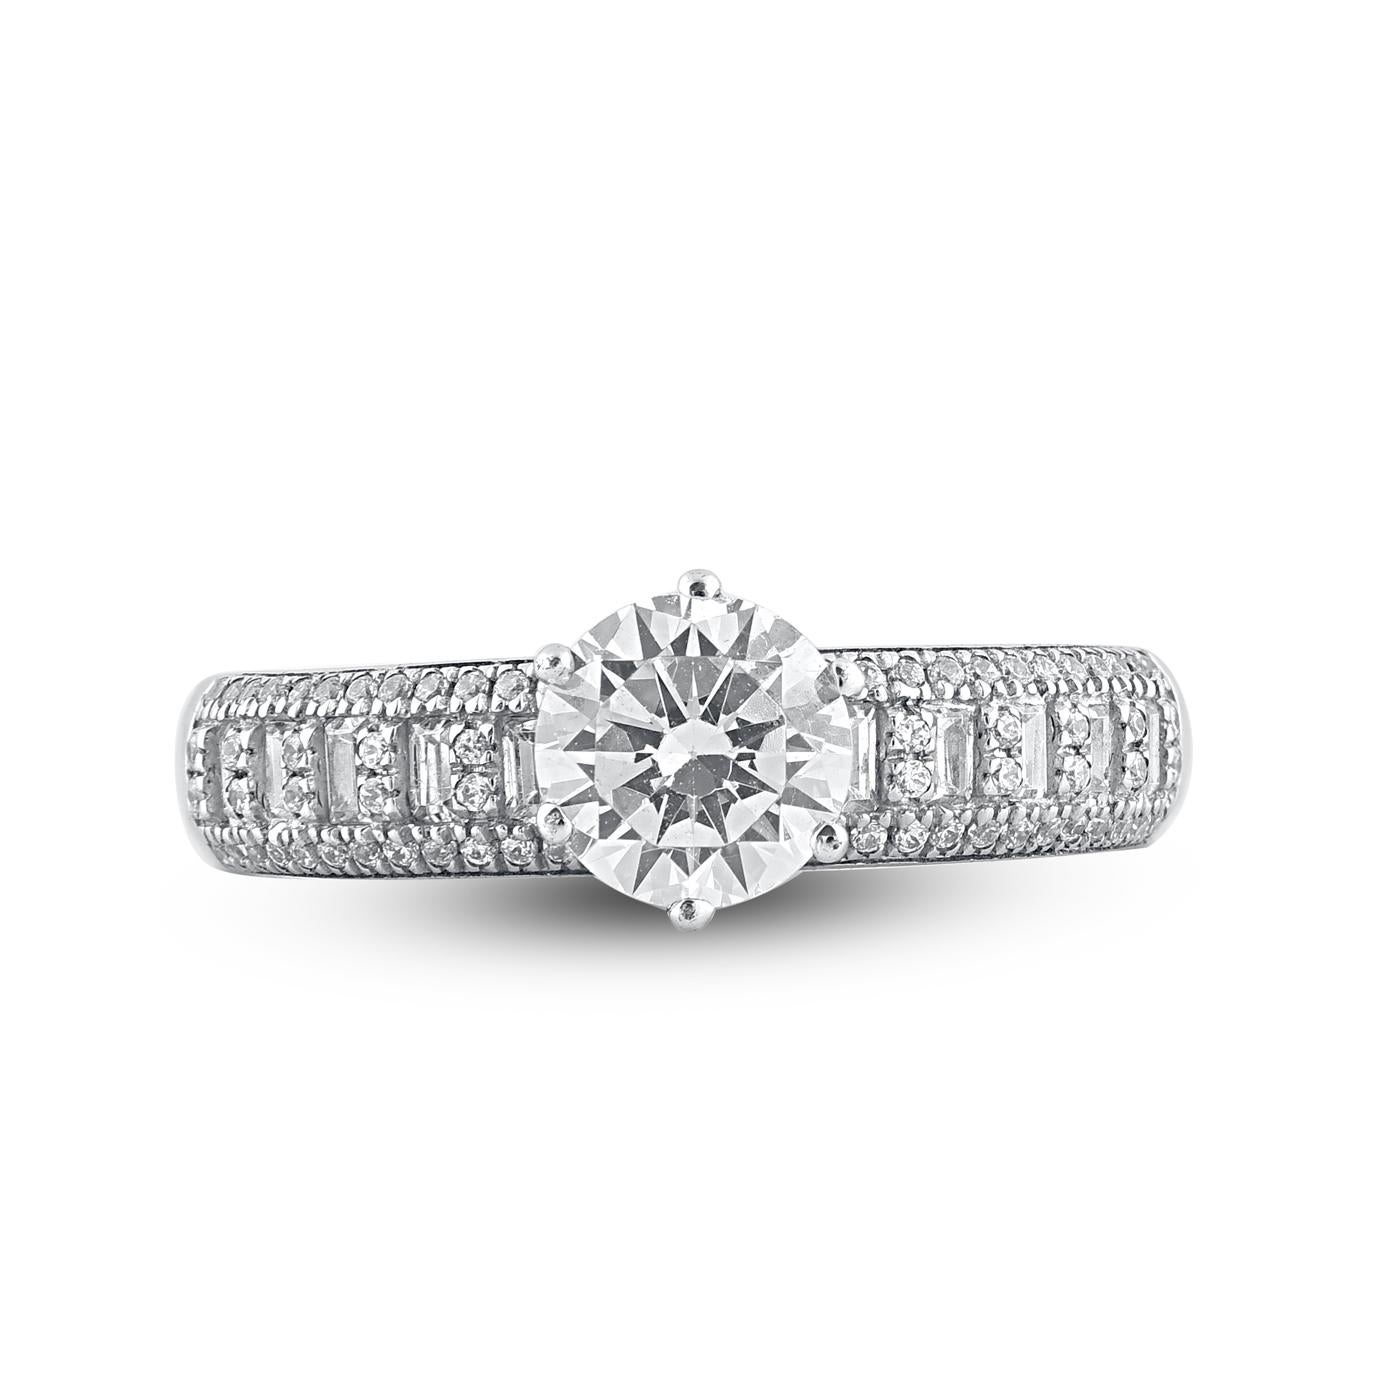 Make a bold statement of love with this engagement ring. Beautifully crafted by our inhouse experts in 14 karat white gold and embellished with 93 brilliant cut, single cut round diamond and baguette cut diamonds set in prong, pave and channel